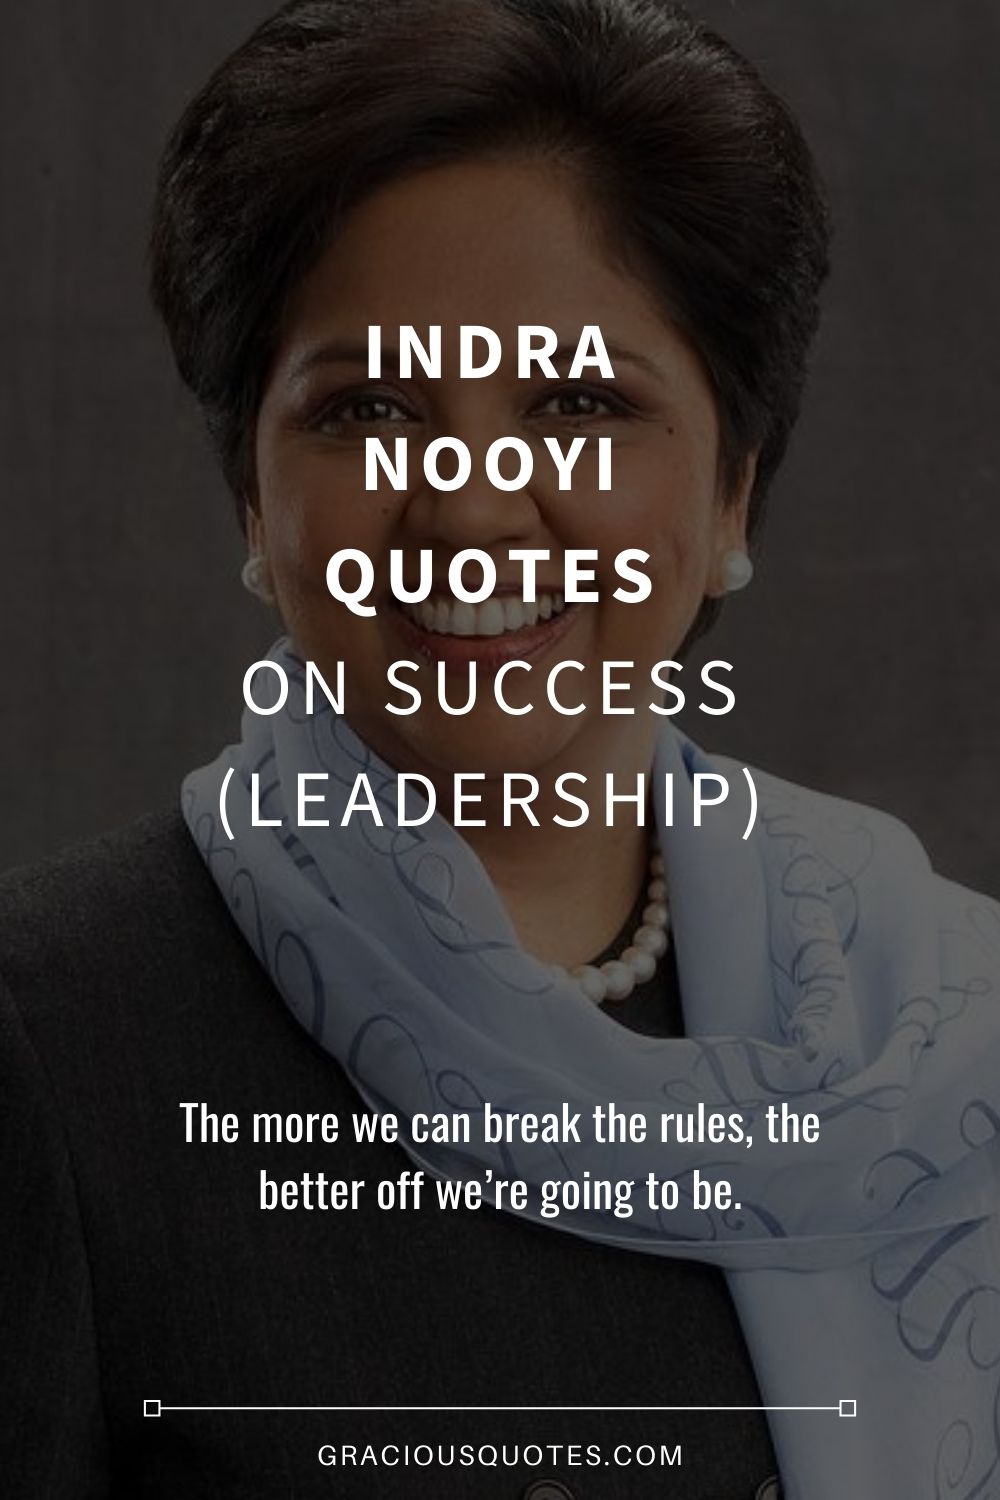 Indra Nooyi Quotes on Success (LEADERSHIP) - Gracious Quotes